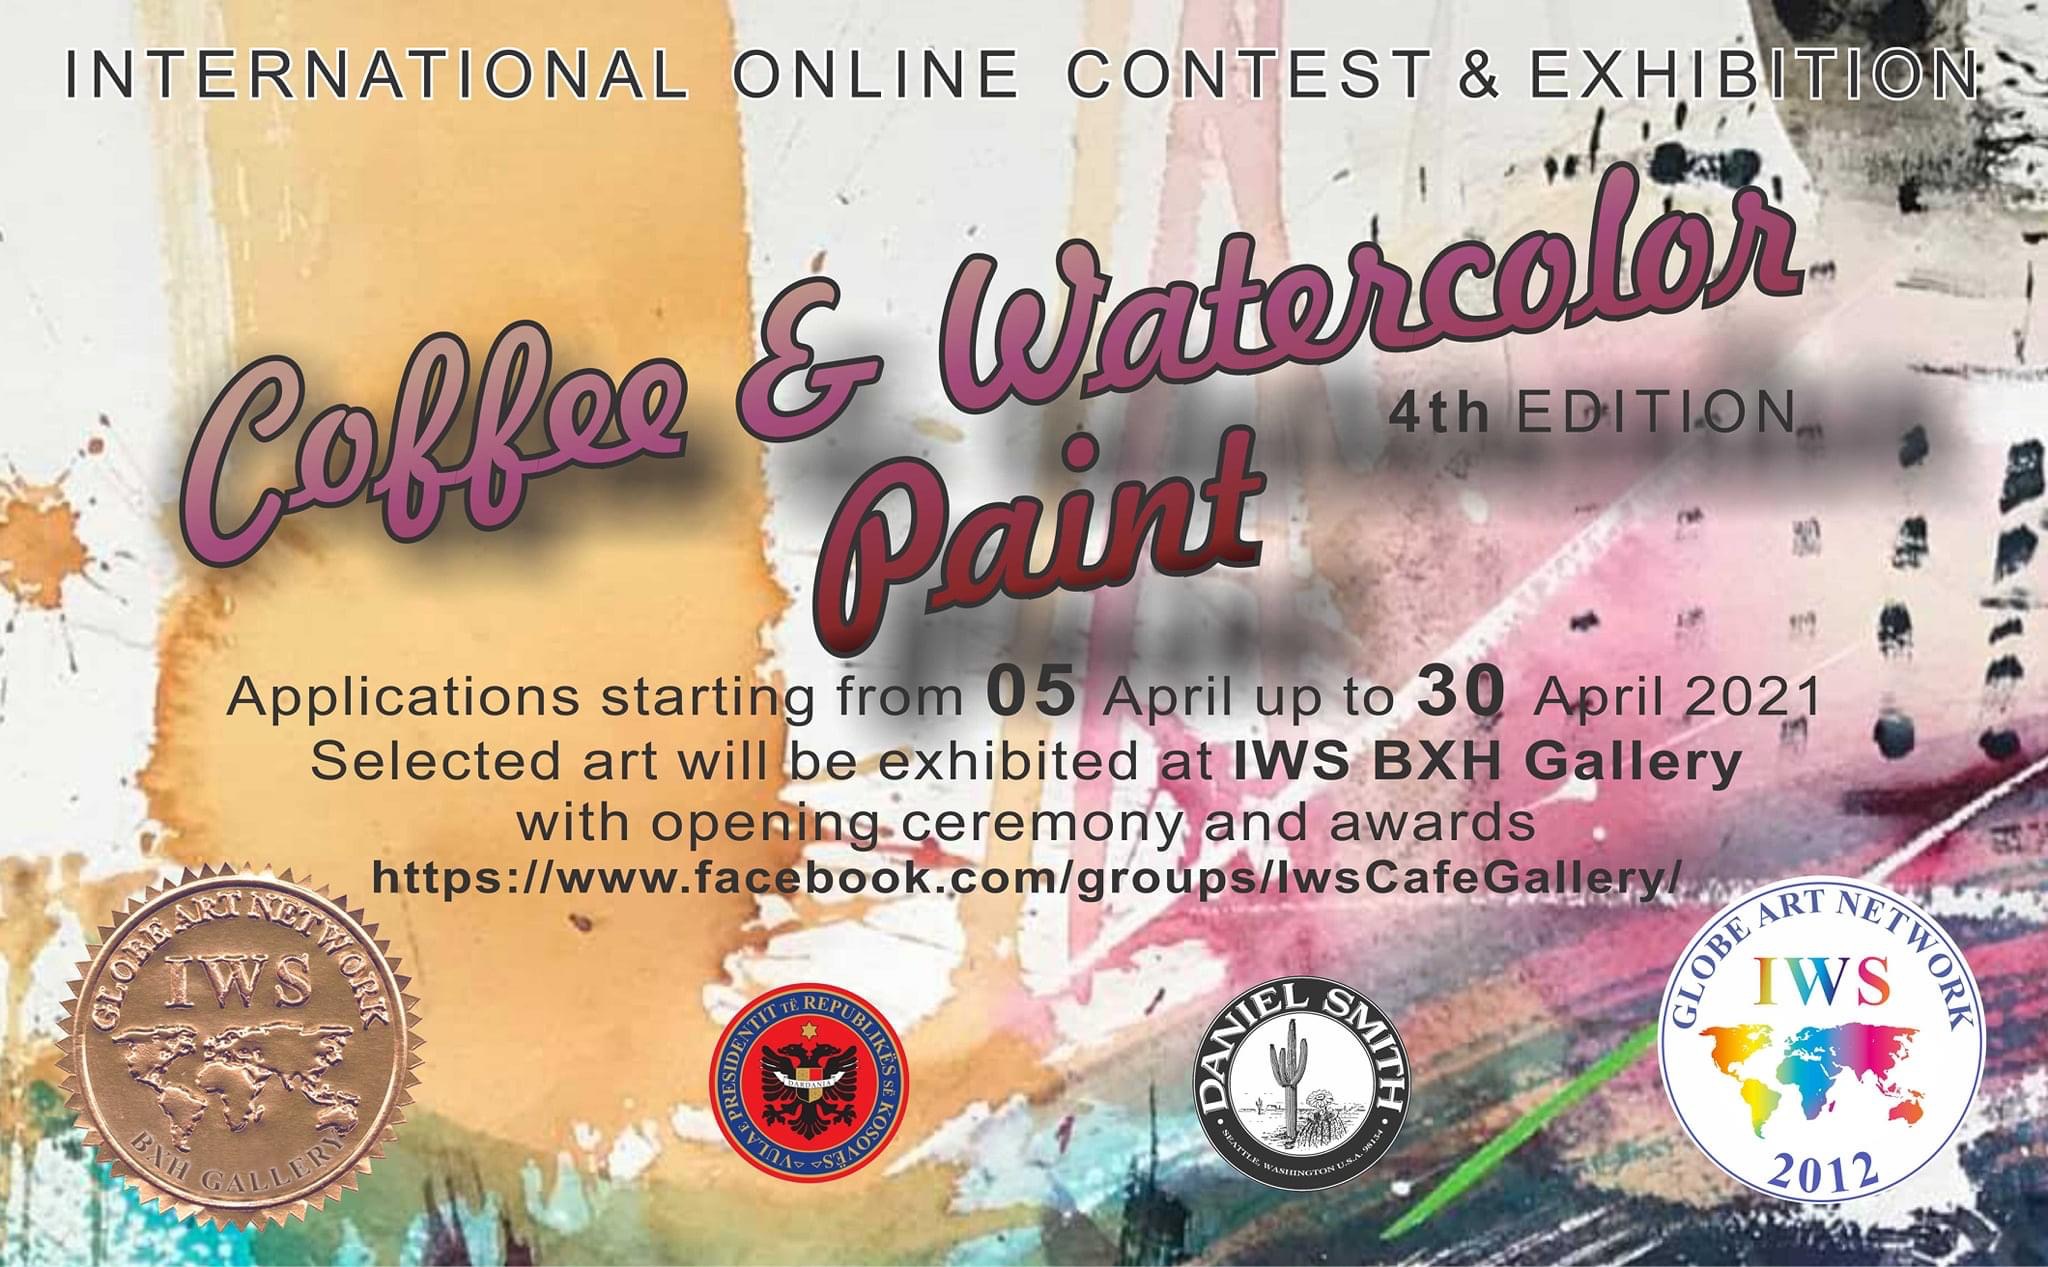 IWS BXH Gallery: Coffee & Watercolor Paint 2021